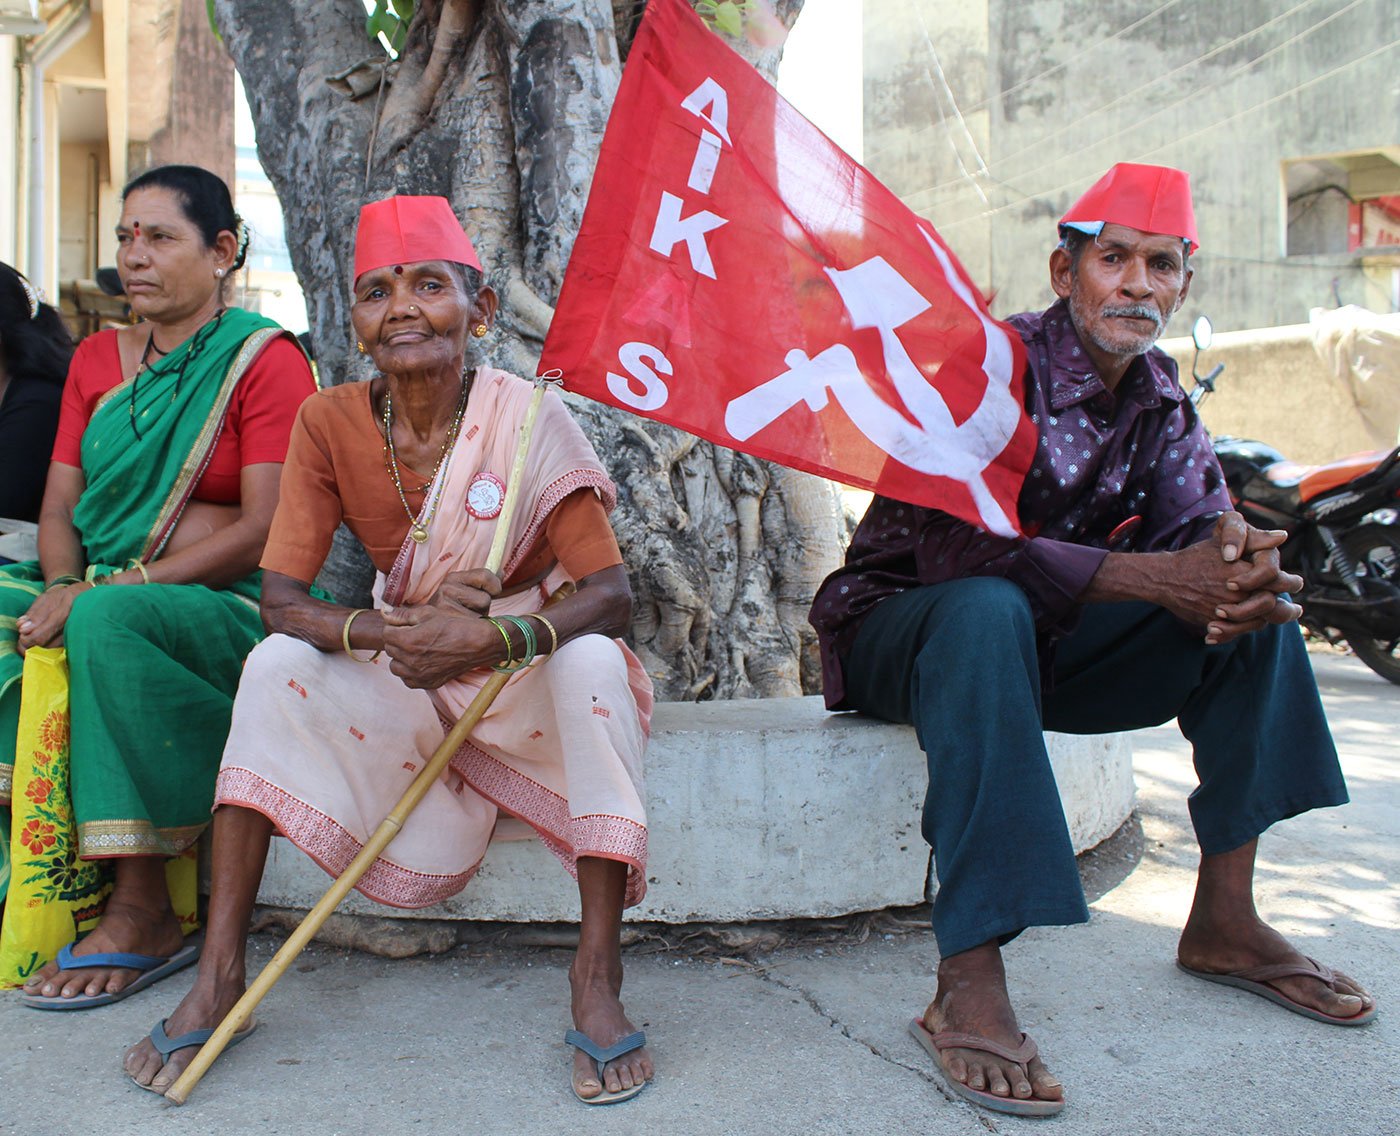 Two women and a man sitting under a tree. One of the women is holding the All India Kisan Sabha flag.